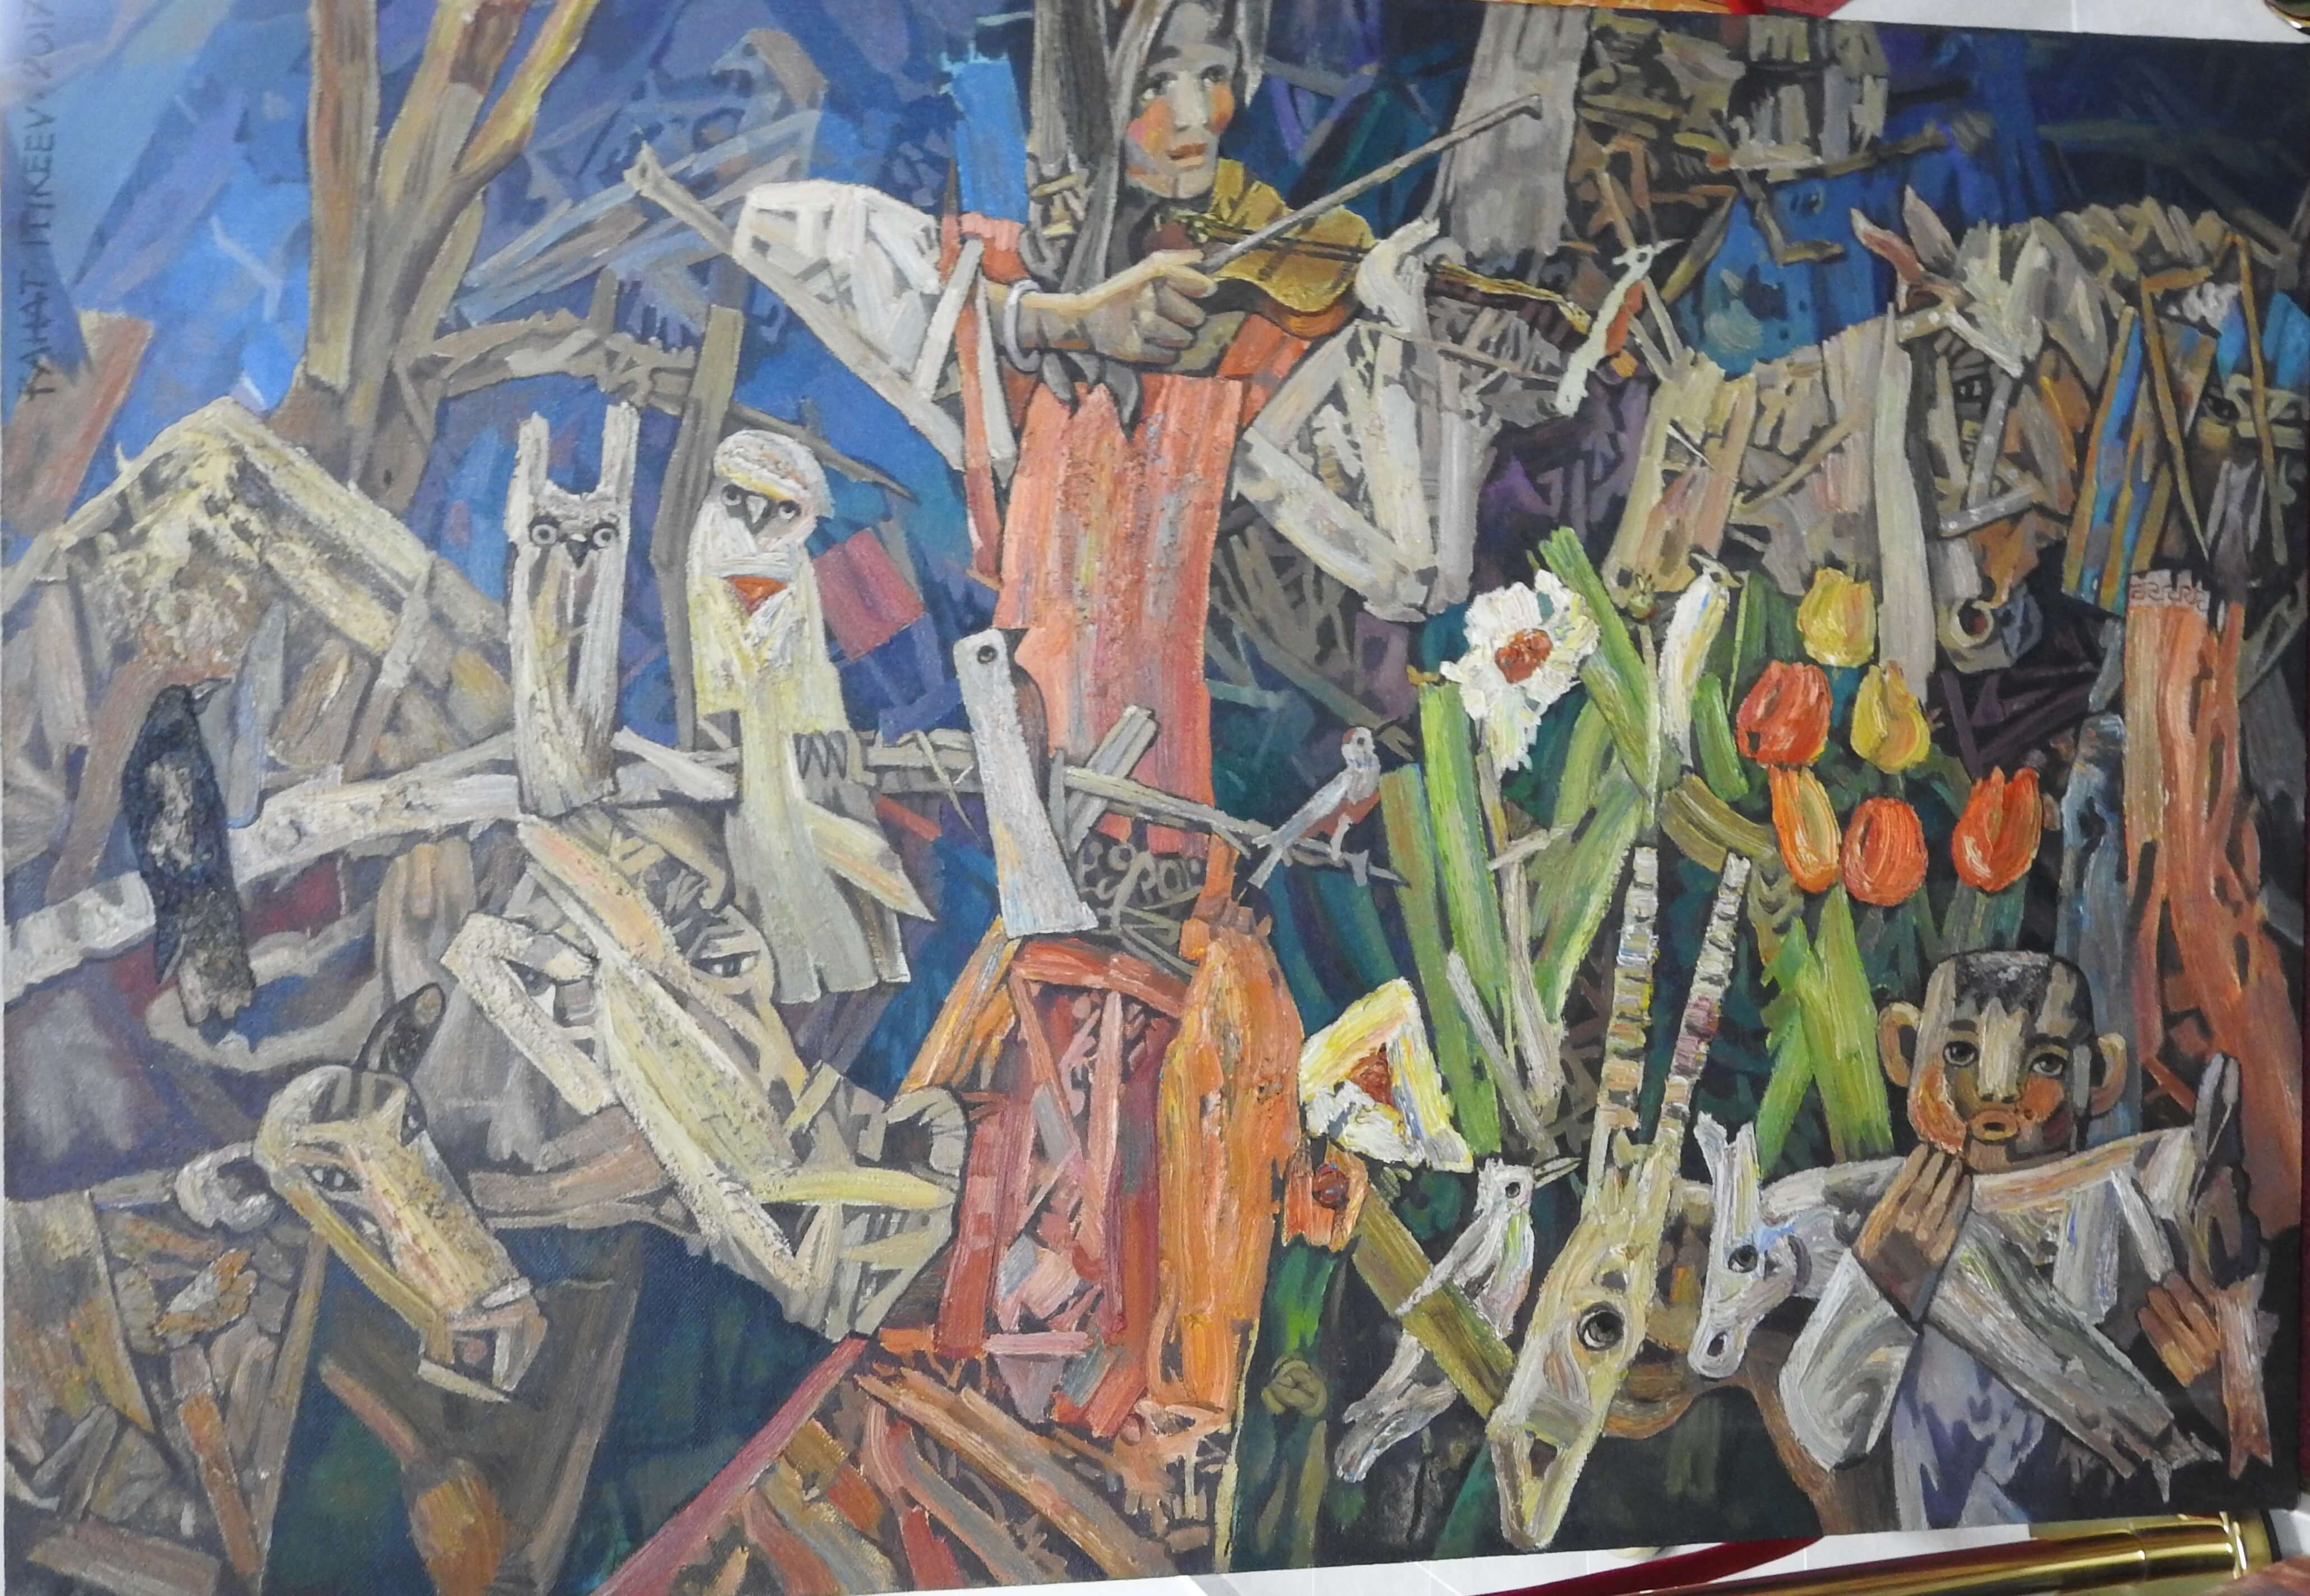 60 Paintings Created by the People’s Artists of Kyrgyzstan Will Be Exhibited; the Paintings Have Been Donated to Cyprus Museum of Modern Arts…